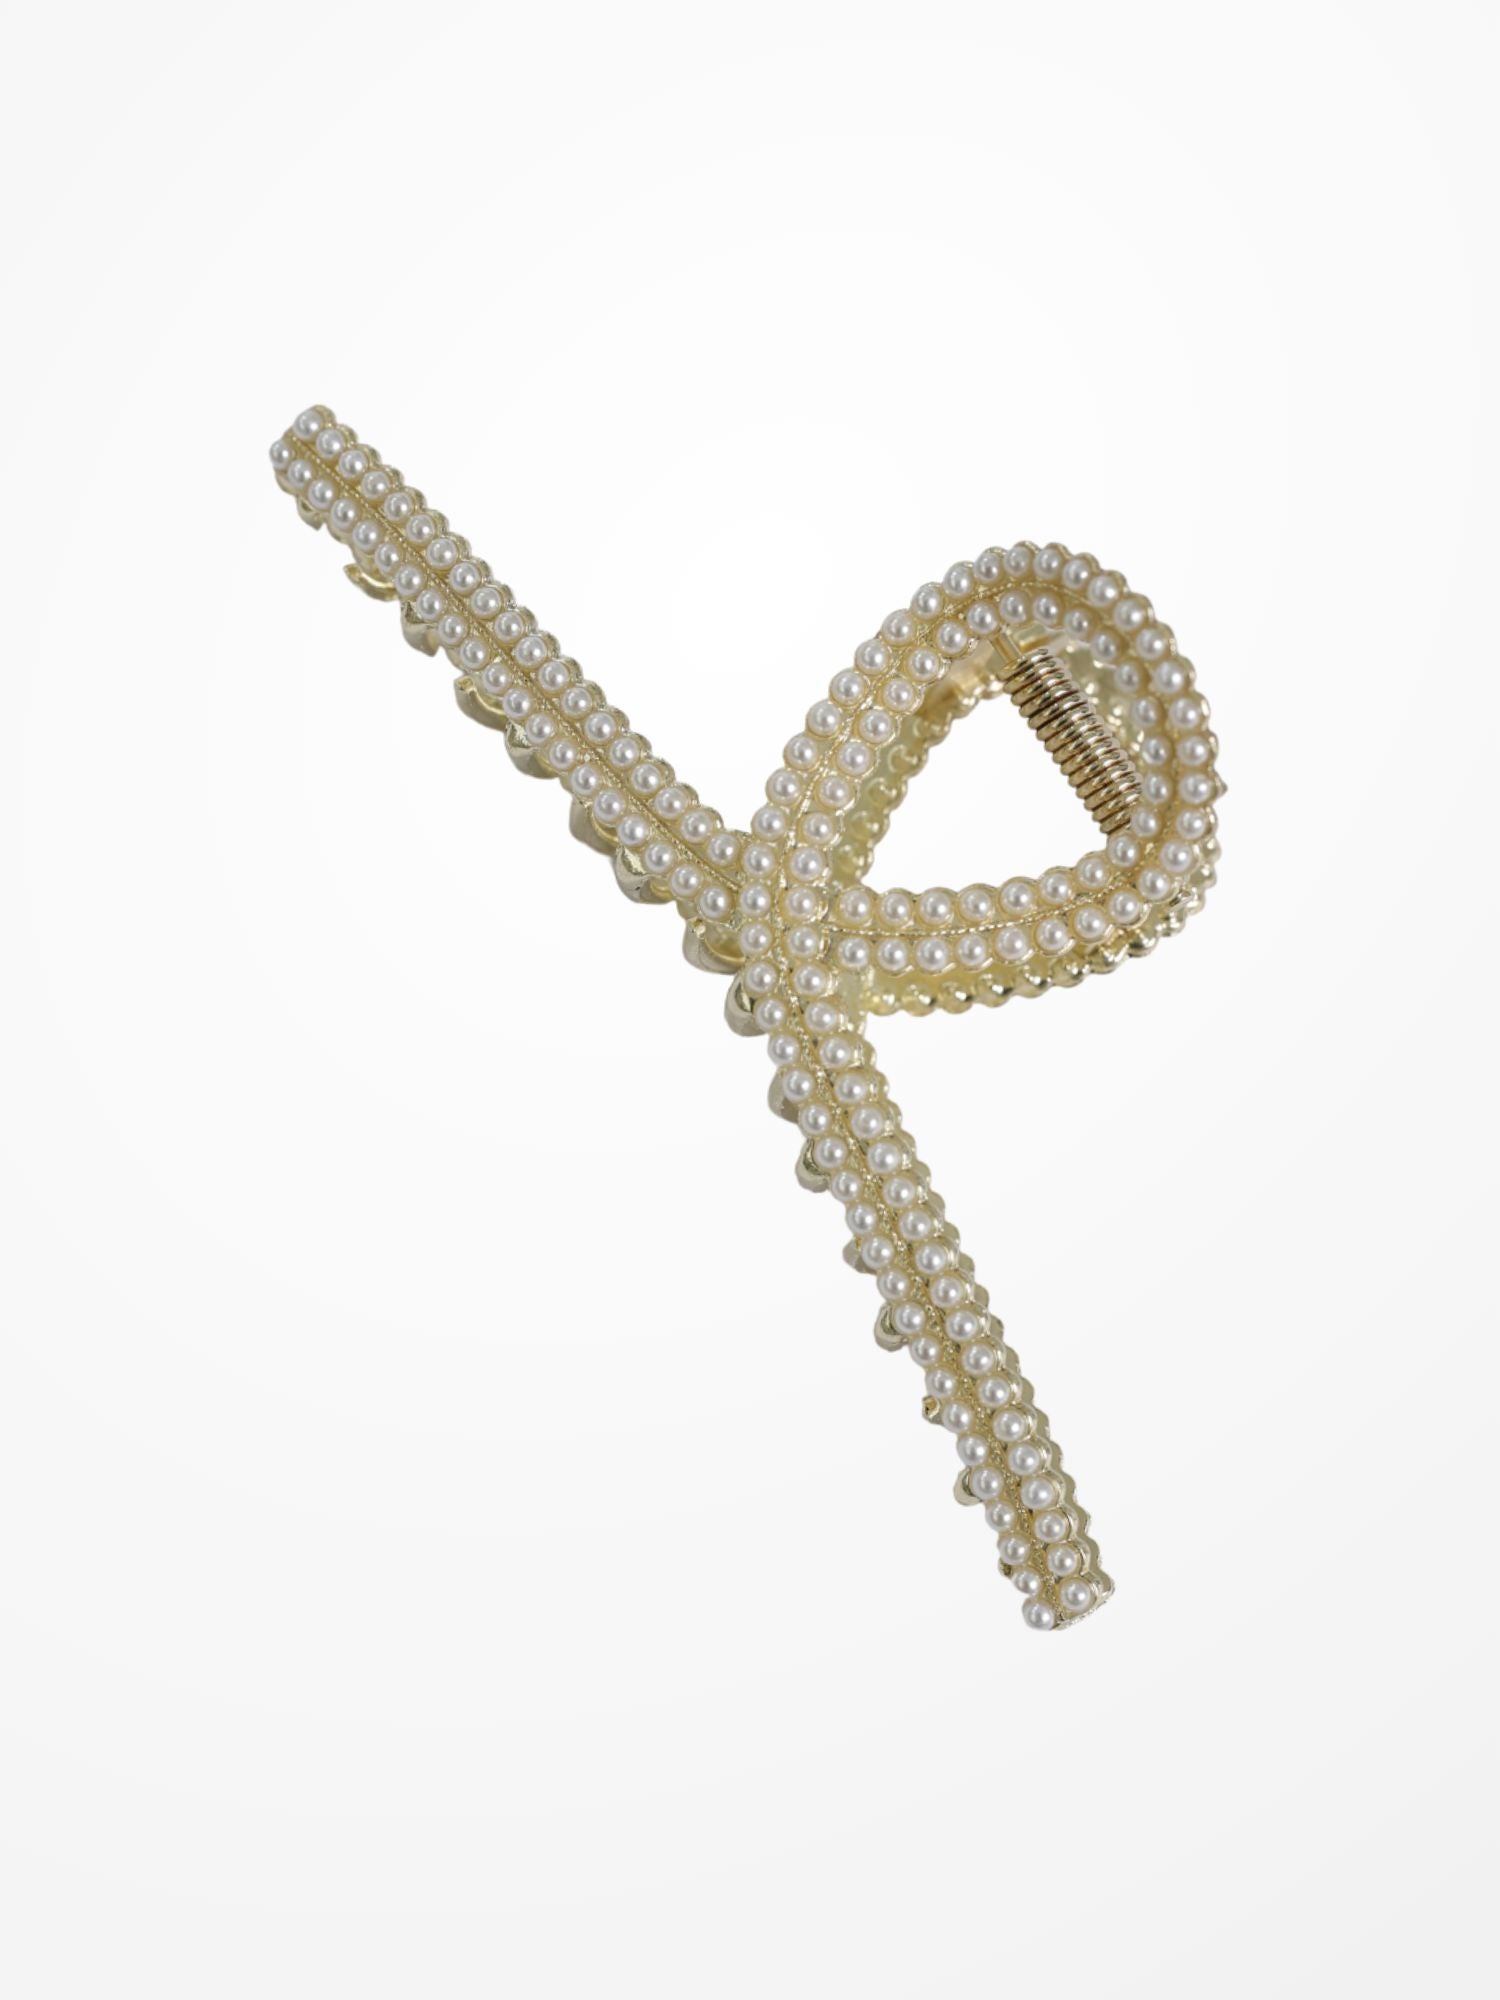 Claw Hair Clips - Buy Claw Hair Clips online in India